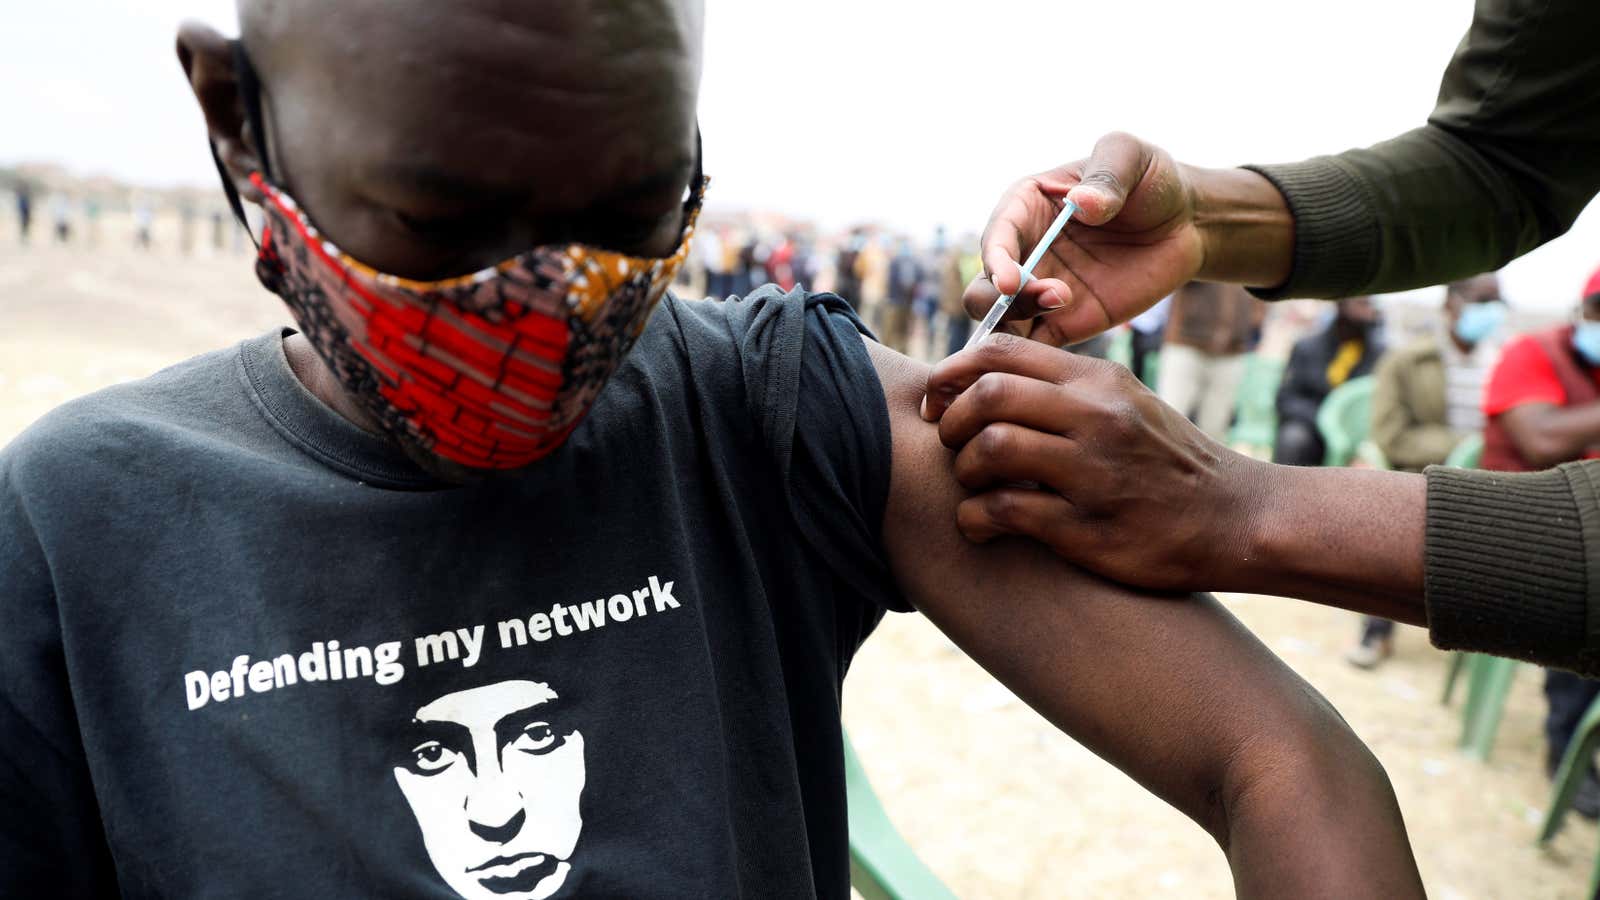 Kenyans are using Twitter to encourage each other to get vaccinated.